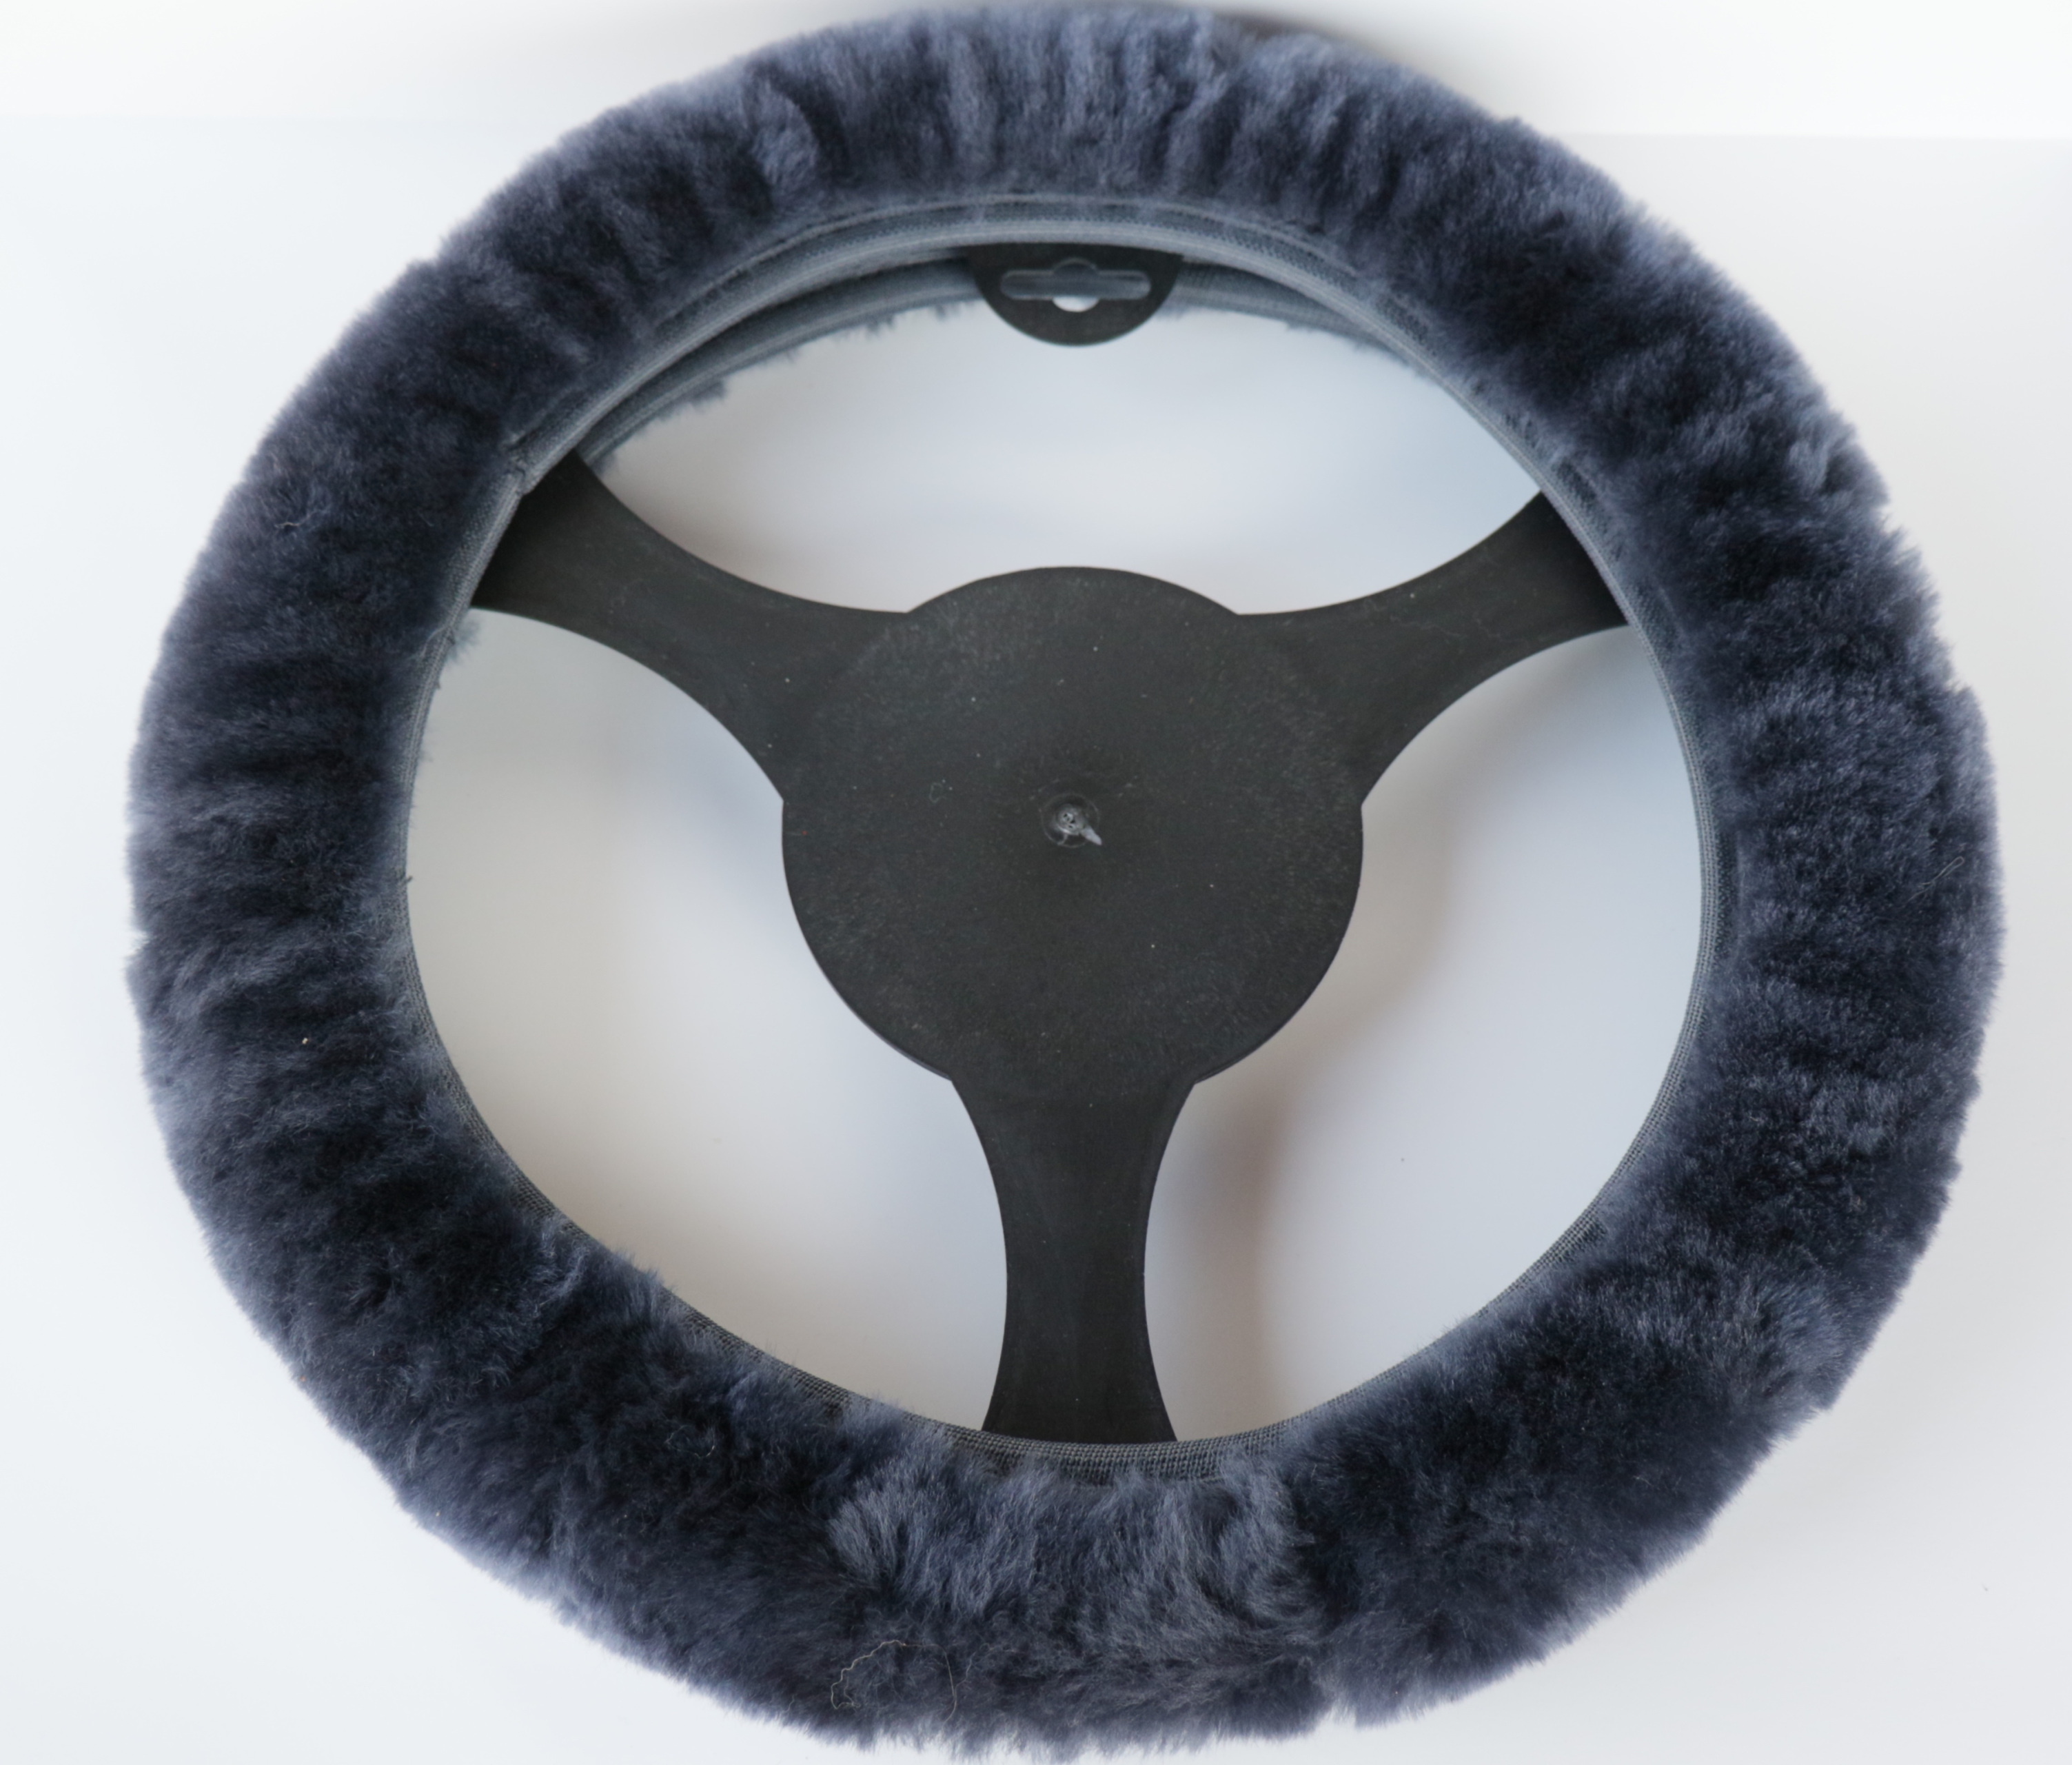 Comfort Wheel, stretch steering wheel cover in real fur - Natural